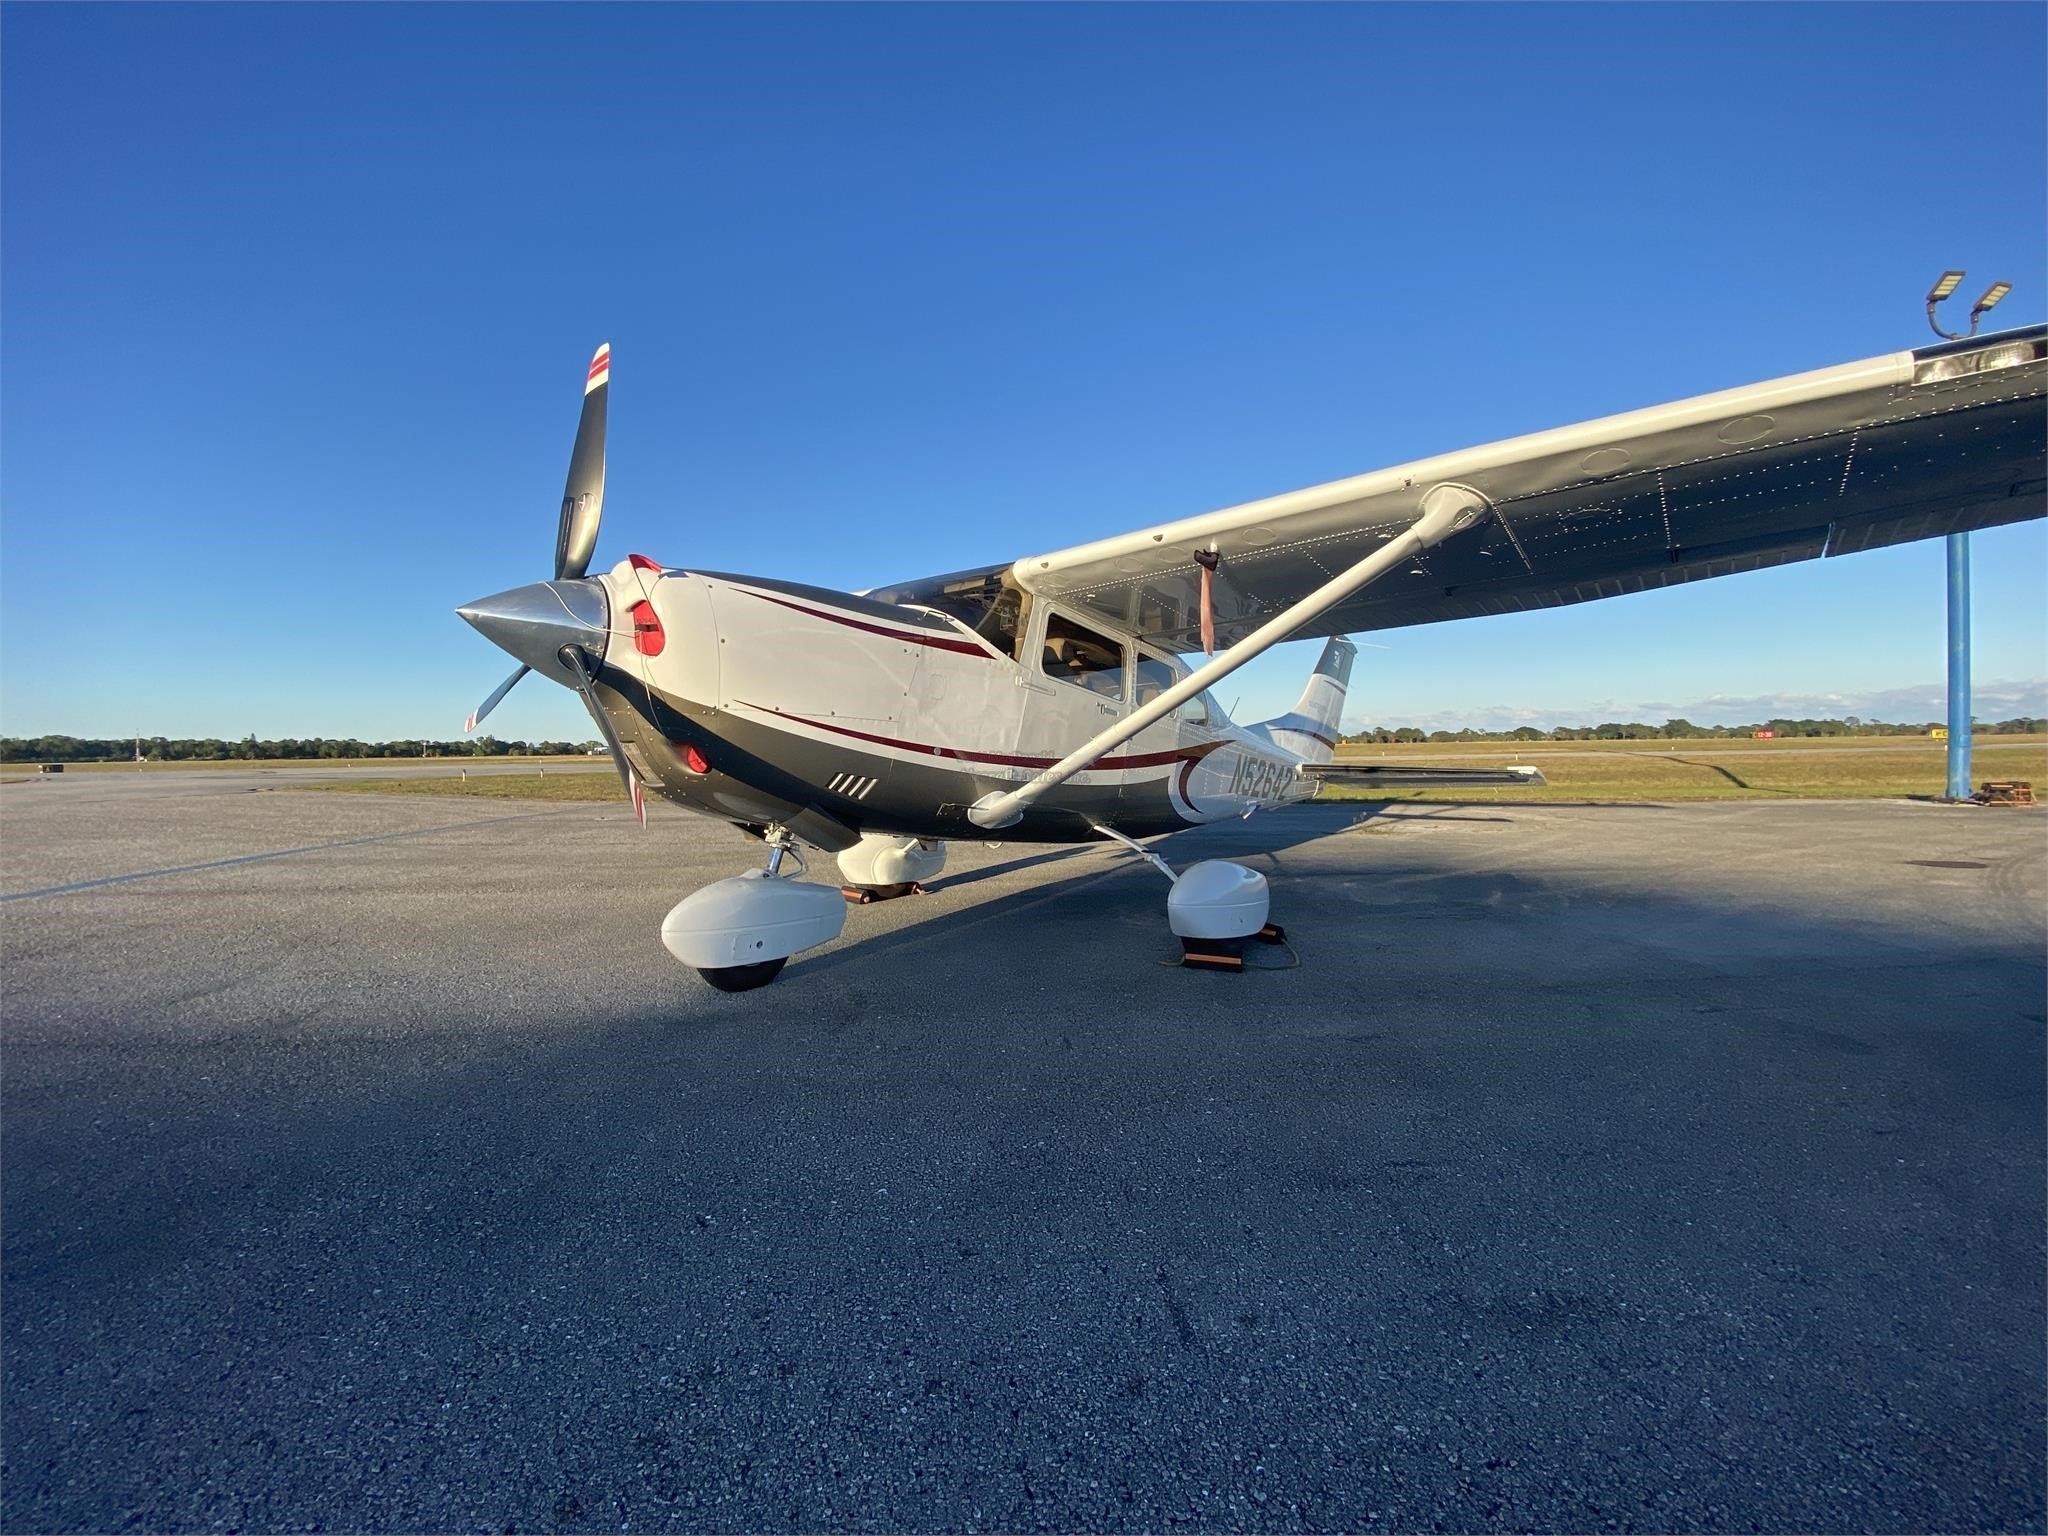 1997 Cessna 172R, Skyhawk for sale, Private aircraft, Aviation enthusiasts, 2050x1540 HD Desktop